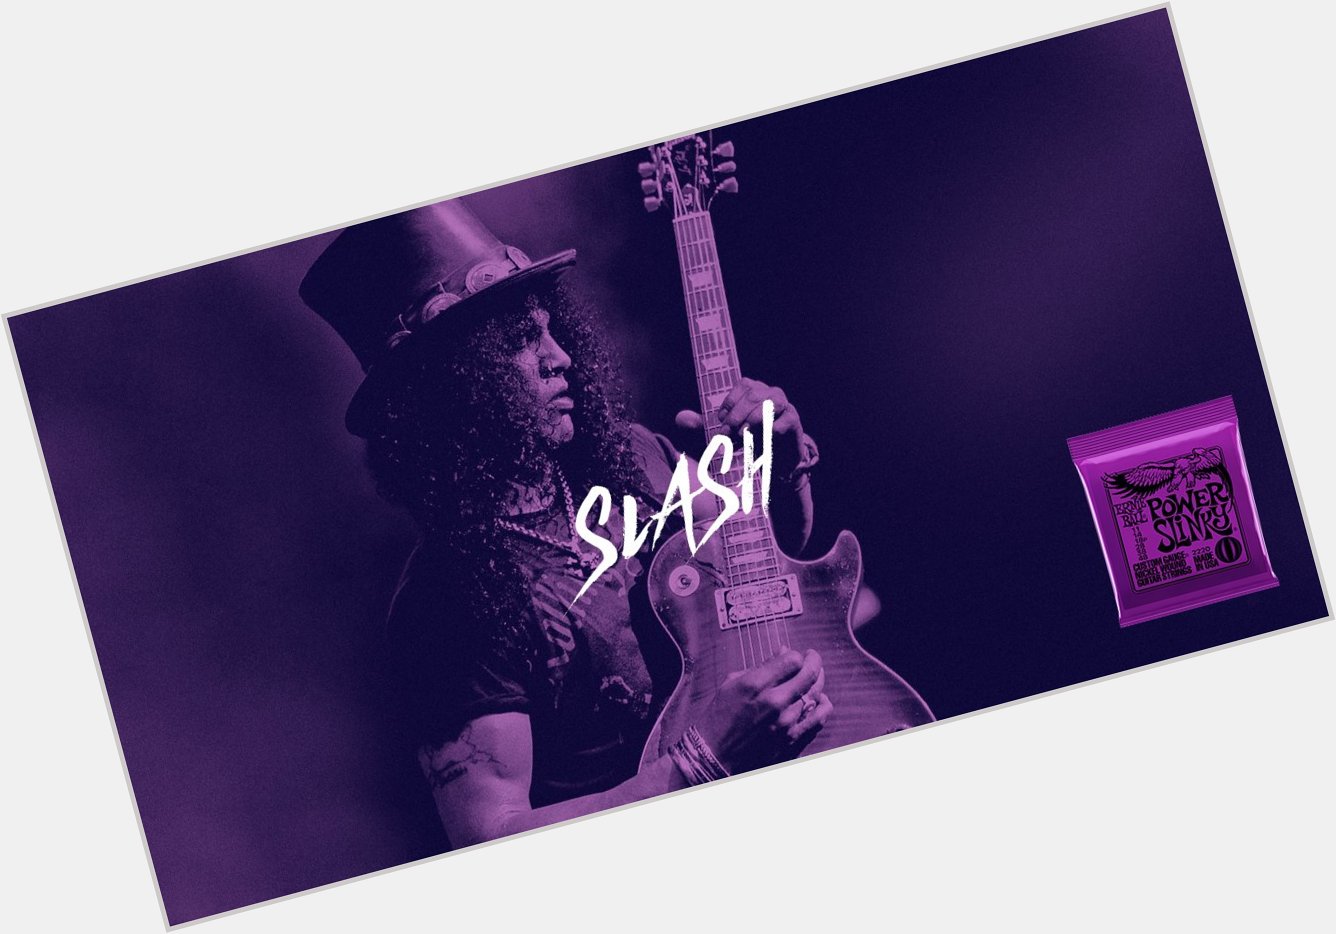 We\re proud to have legendary guitarist as a longtime member of the Ernie Ball family. Happy birthday, Slash. 